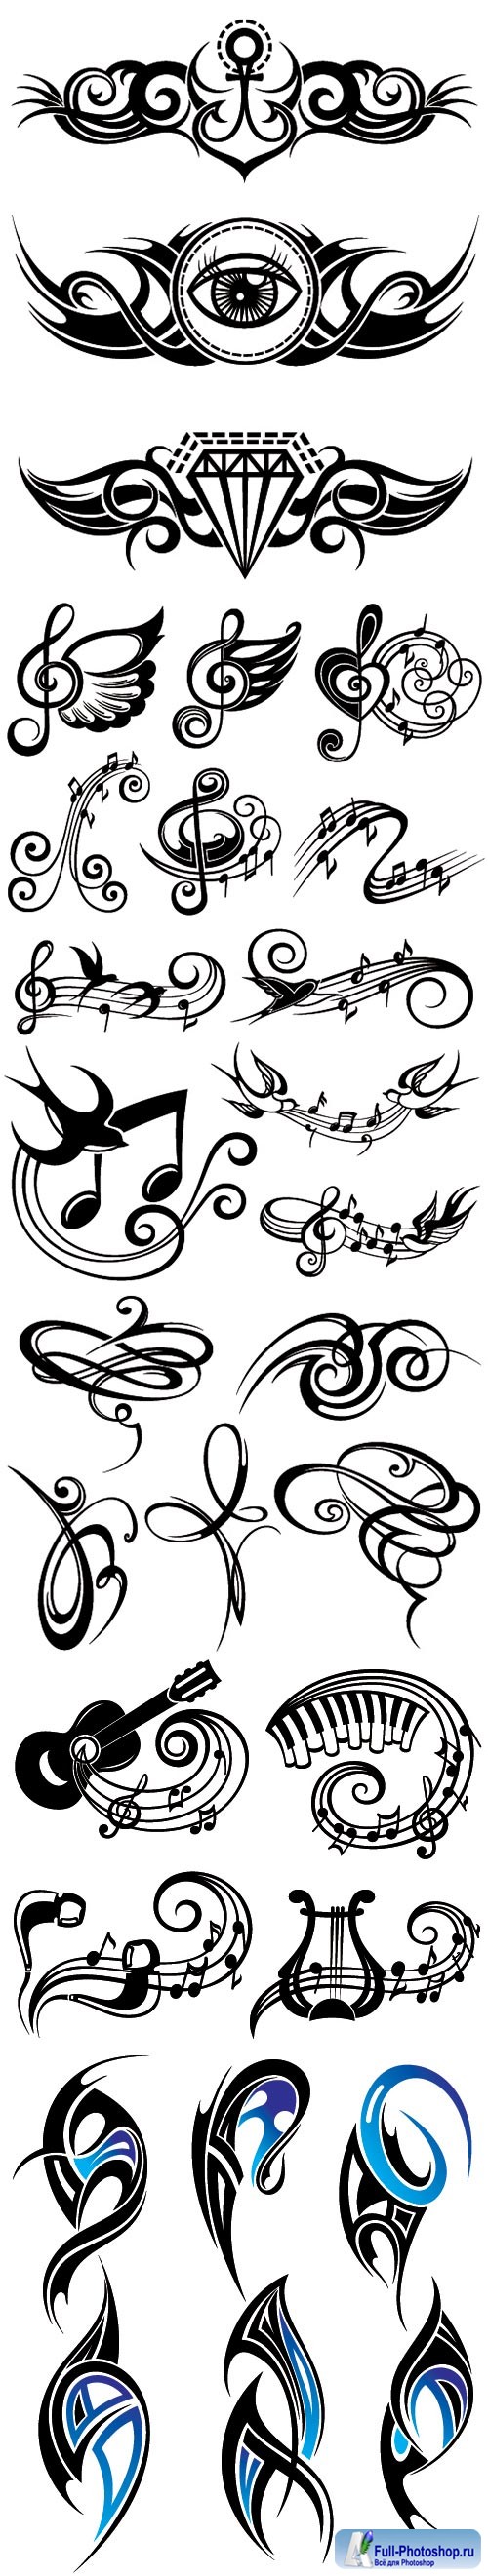 Tattoo patterns in vector